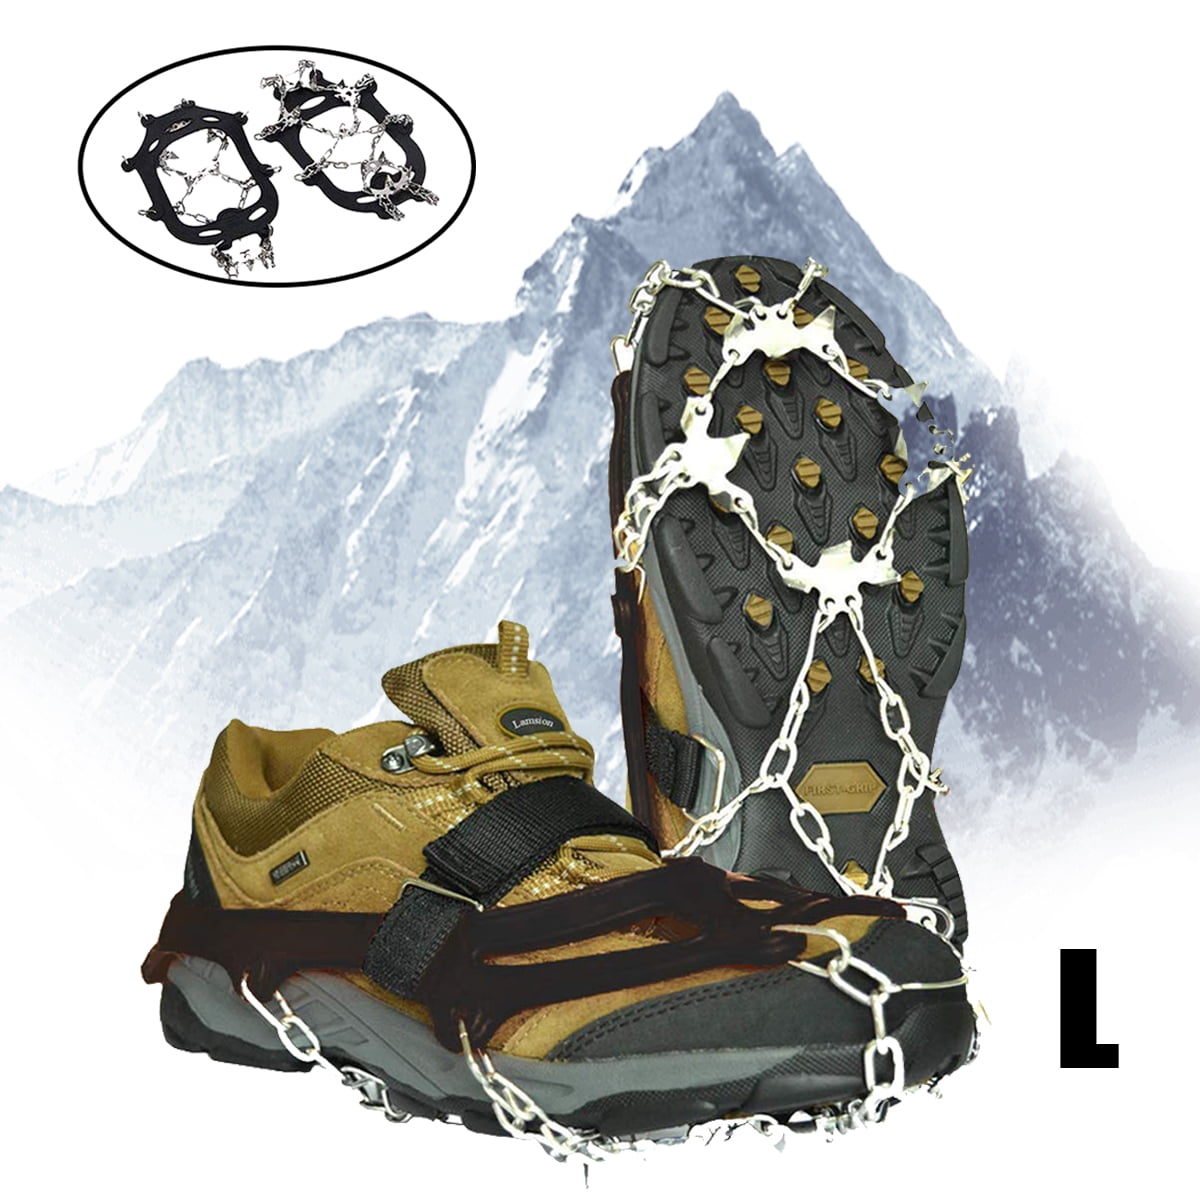 Dilwe Traction Cleats,1 Pair Ice Snow Grips with 4 Spikes for Walking Jogging Hiking Mountaineering 